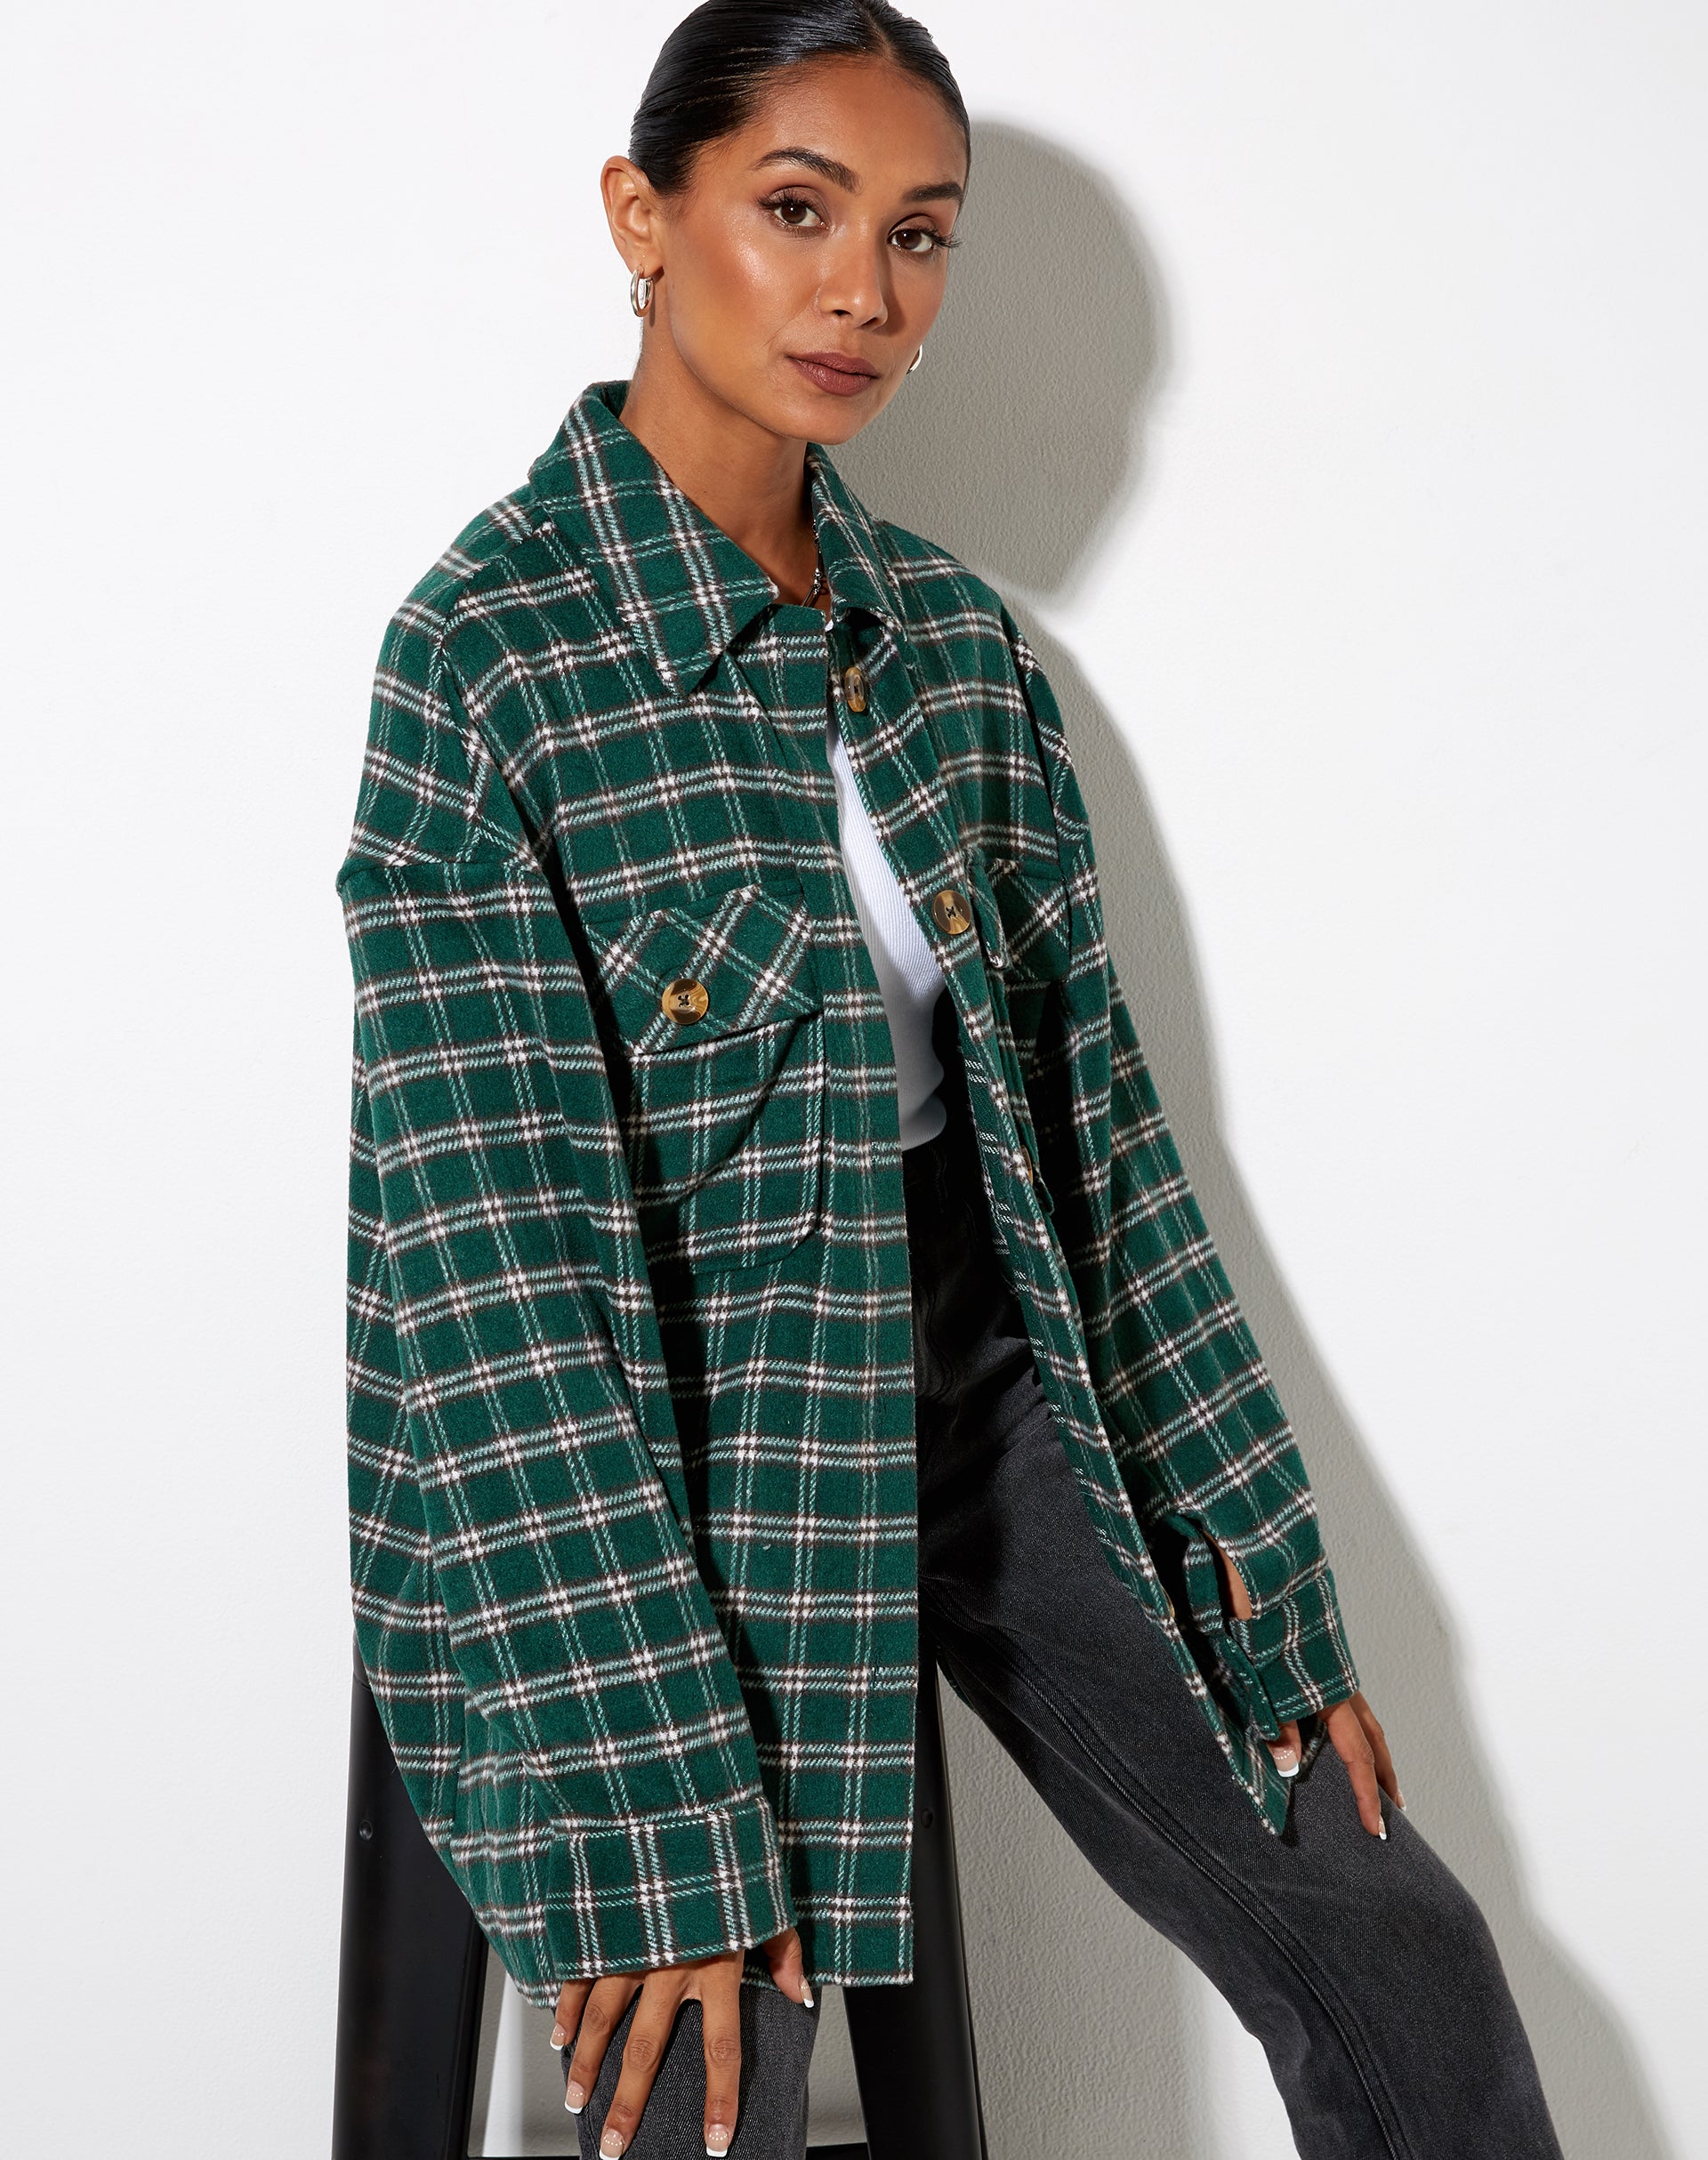 Image of Marcel Shirt in Check Black and Green